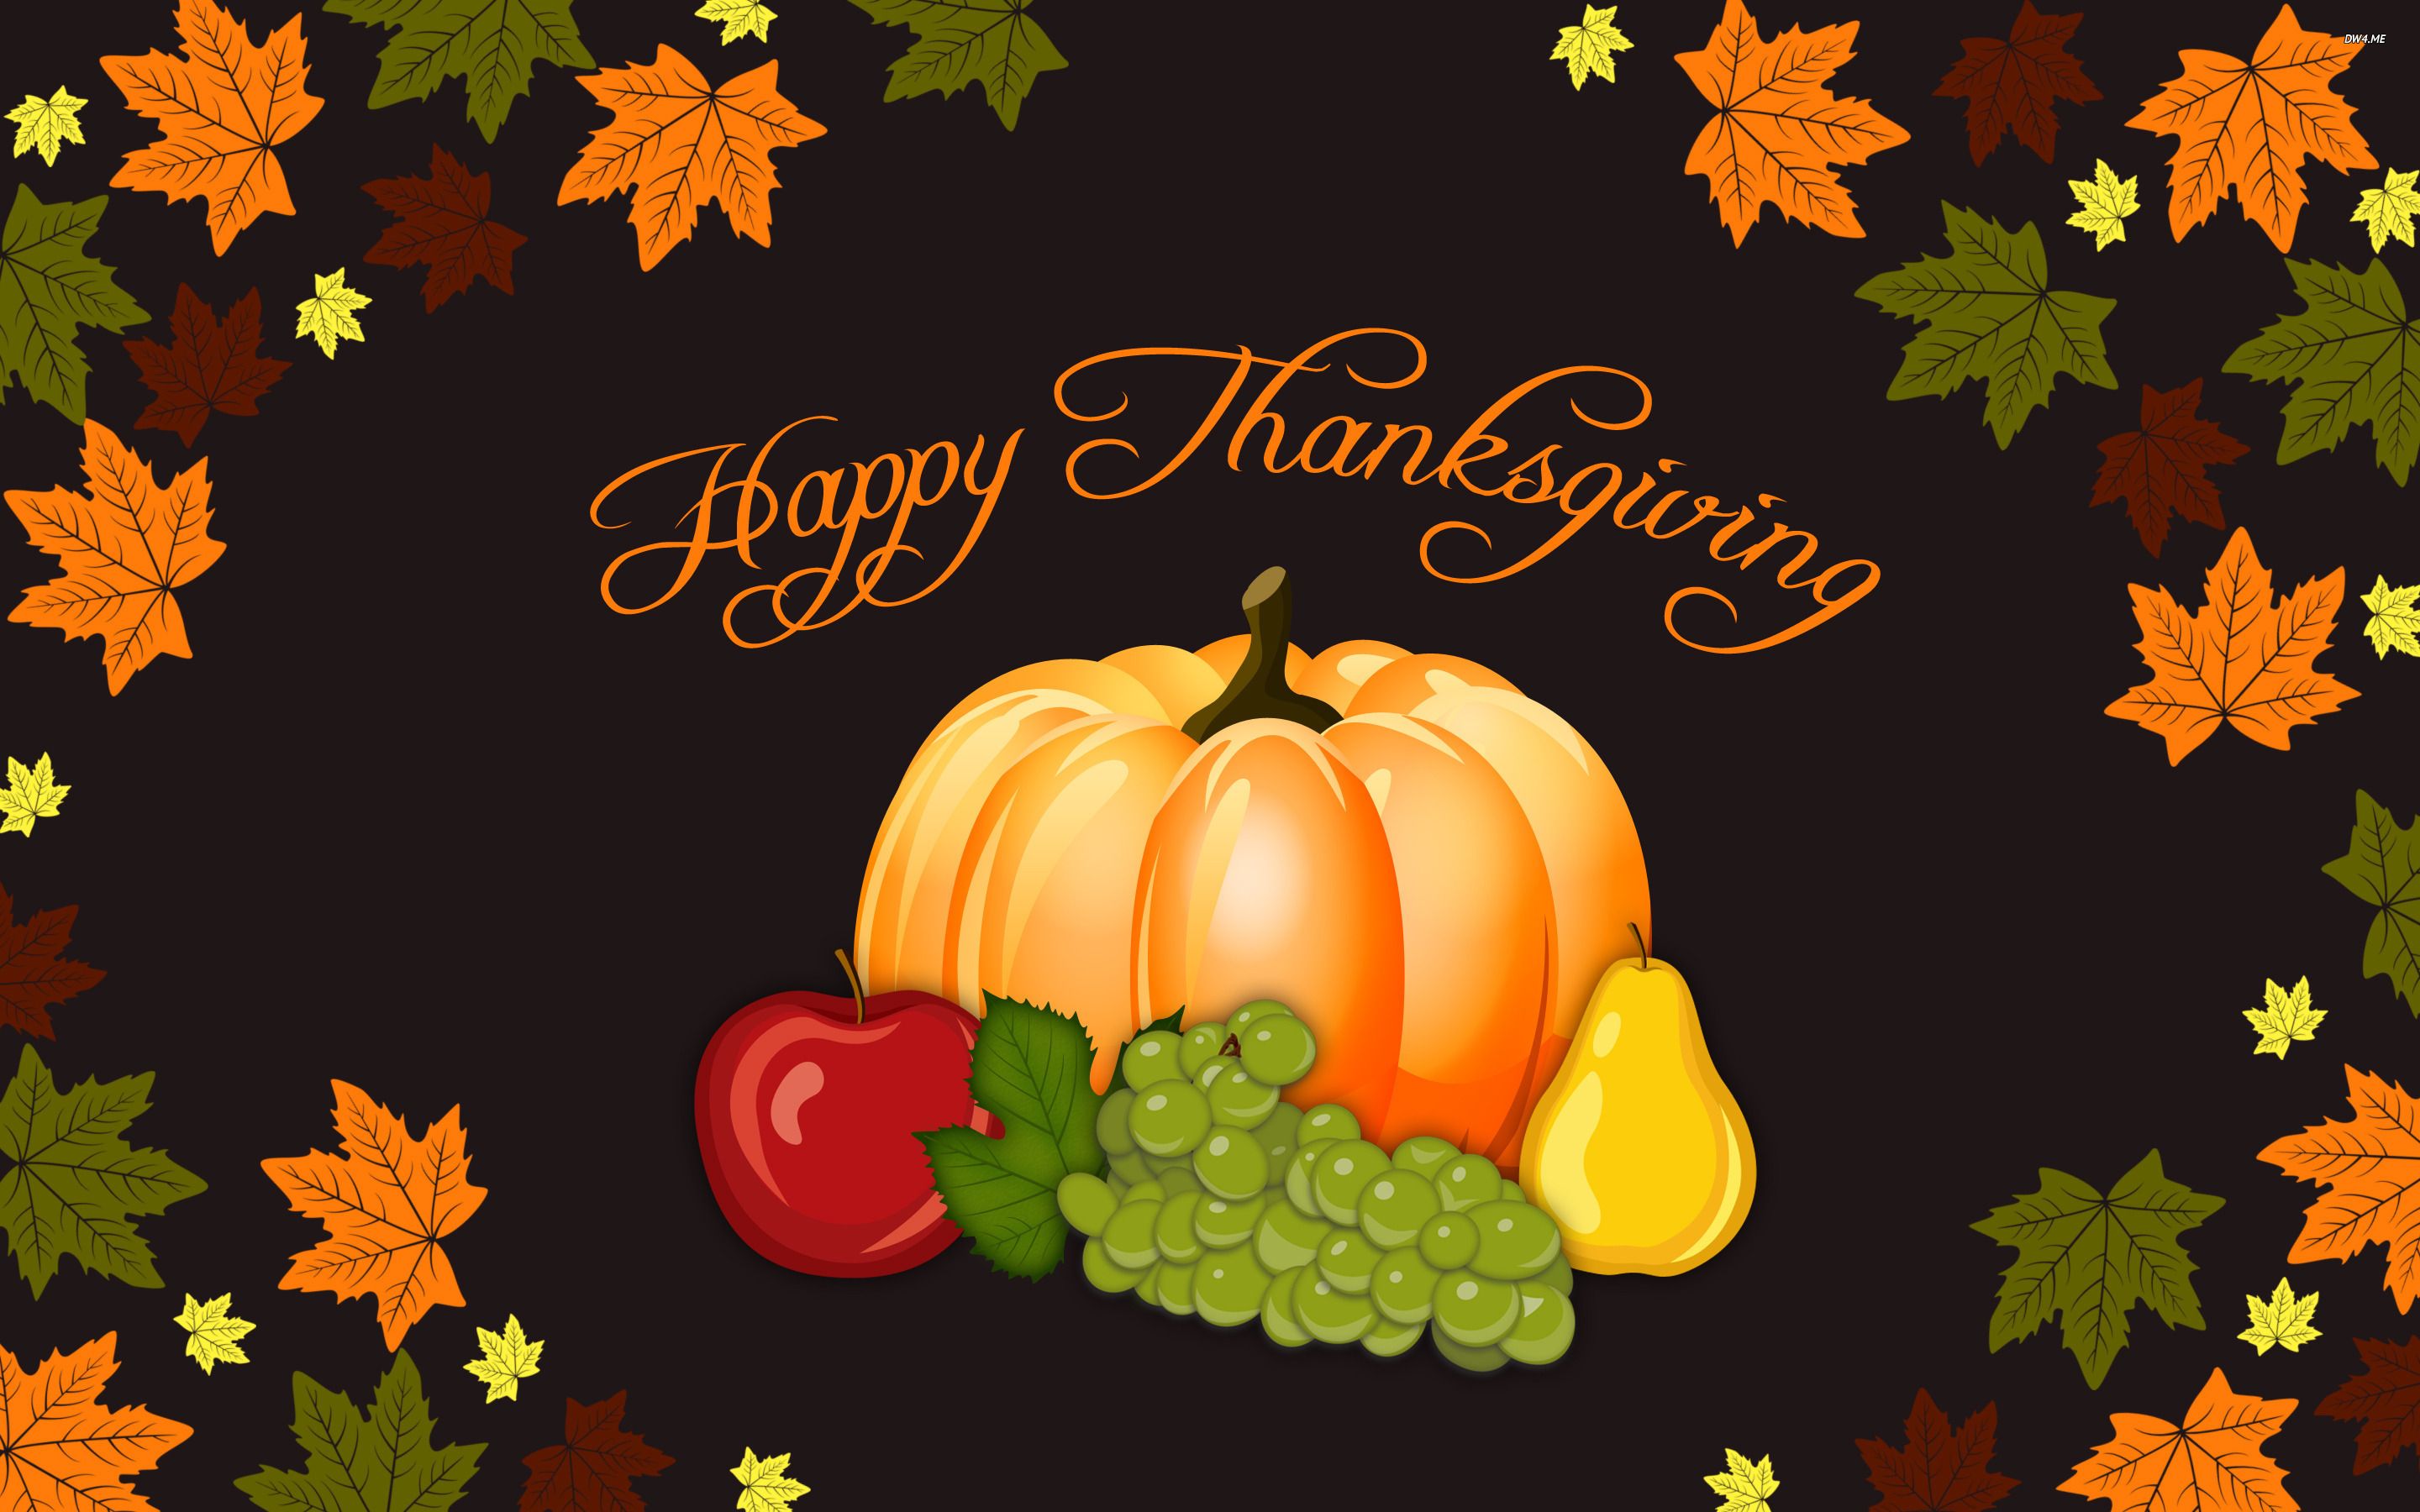 Download The Best Thanksgiving Wallpapers 2015 For - Thanksgiving Wallpaper Free - HD Wallpaper 